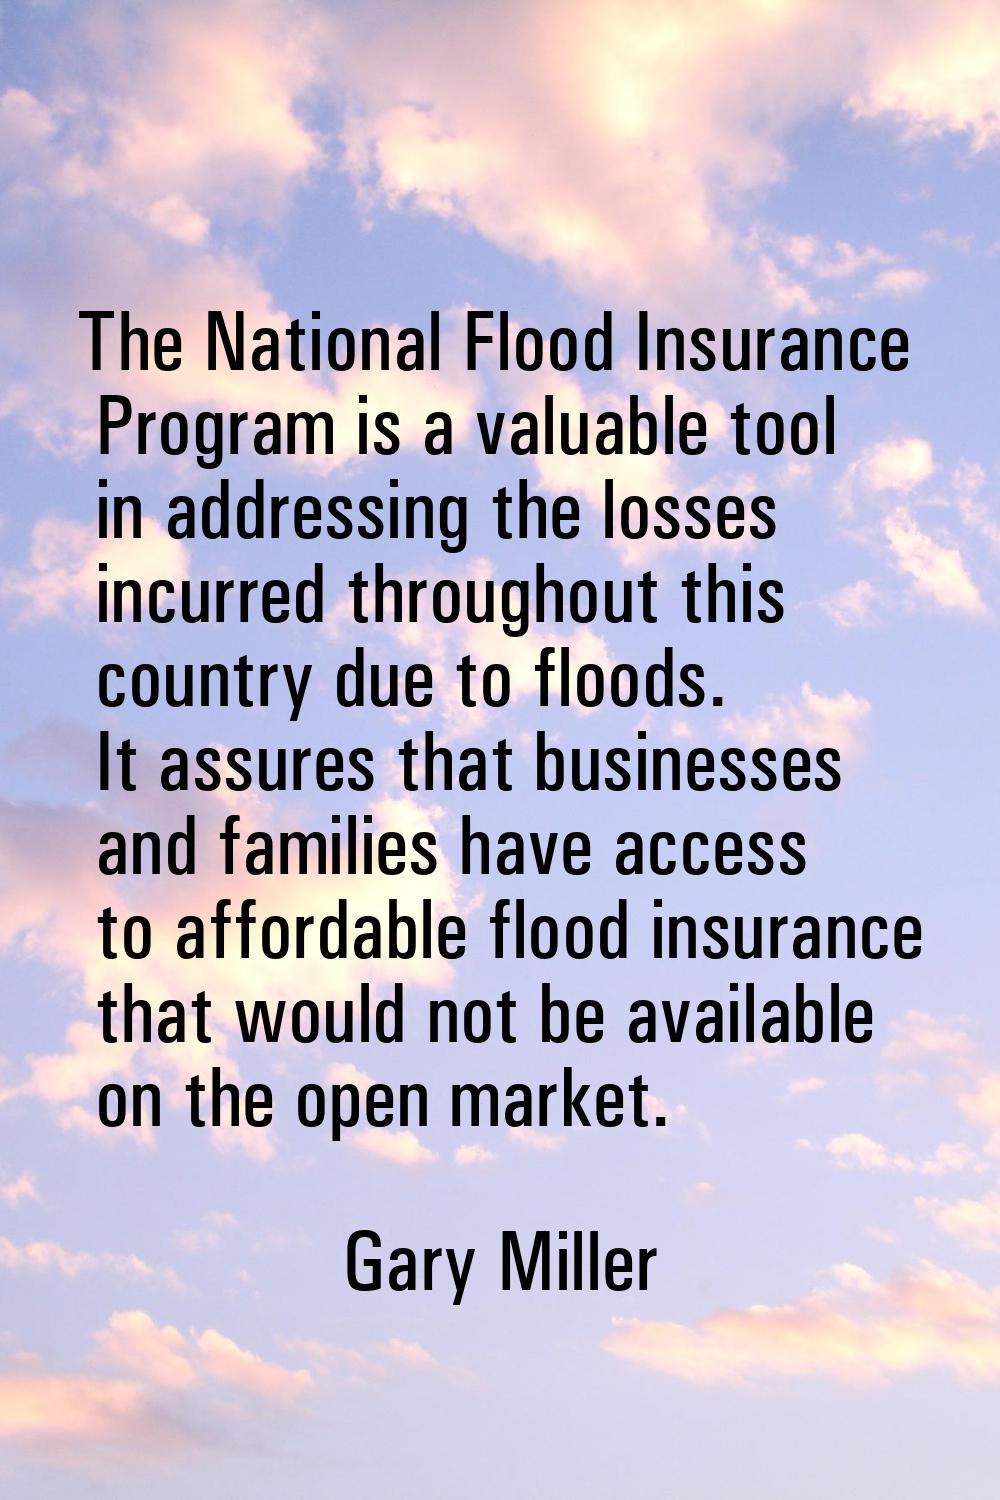 The National Flood Insurance Program is a valuable tool in addressing the losses incurred throughou